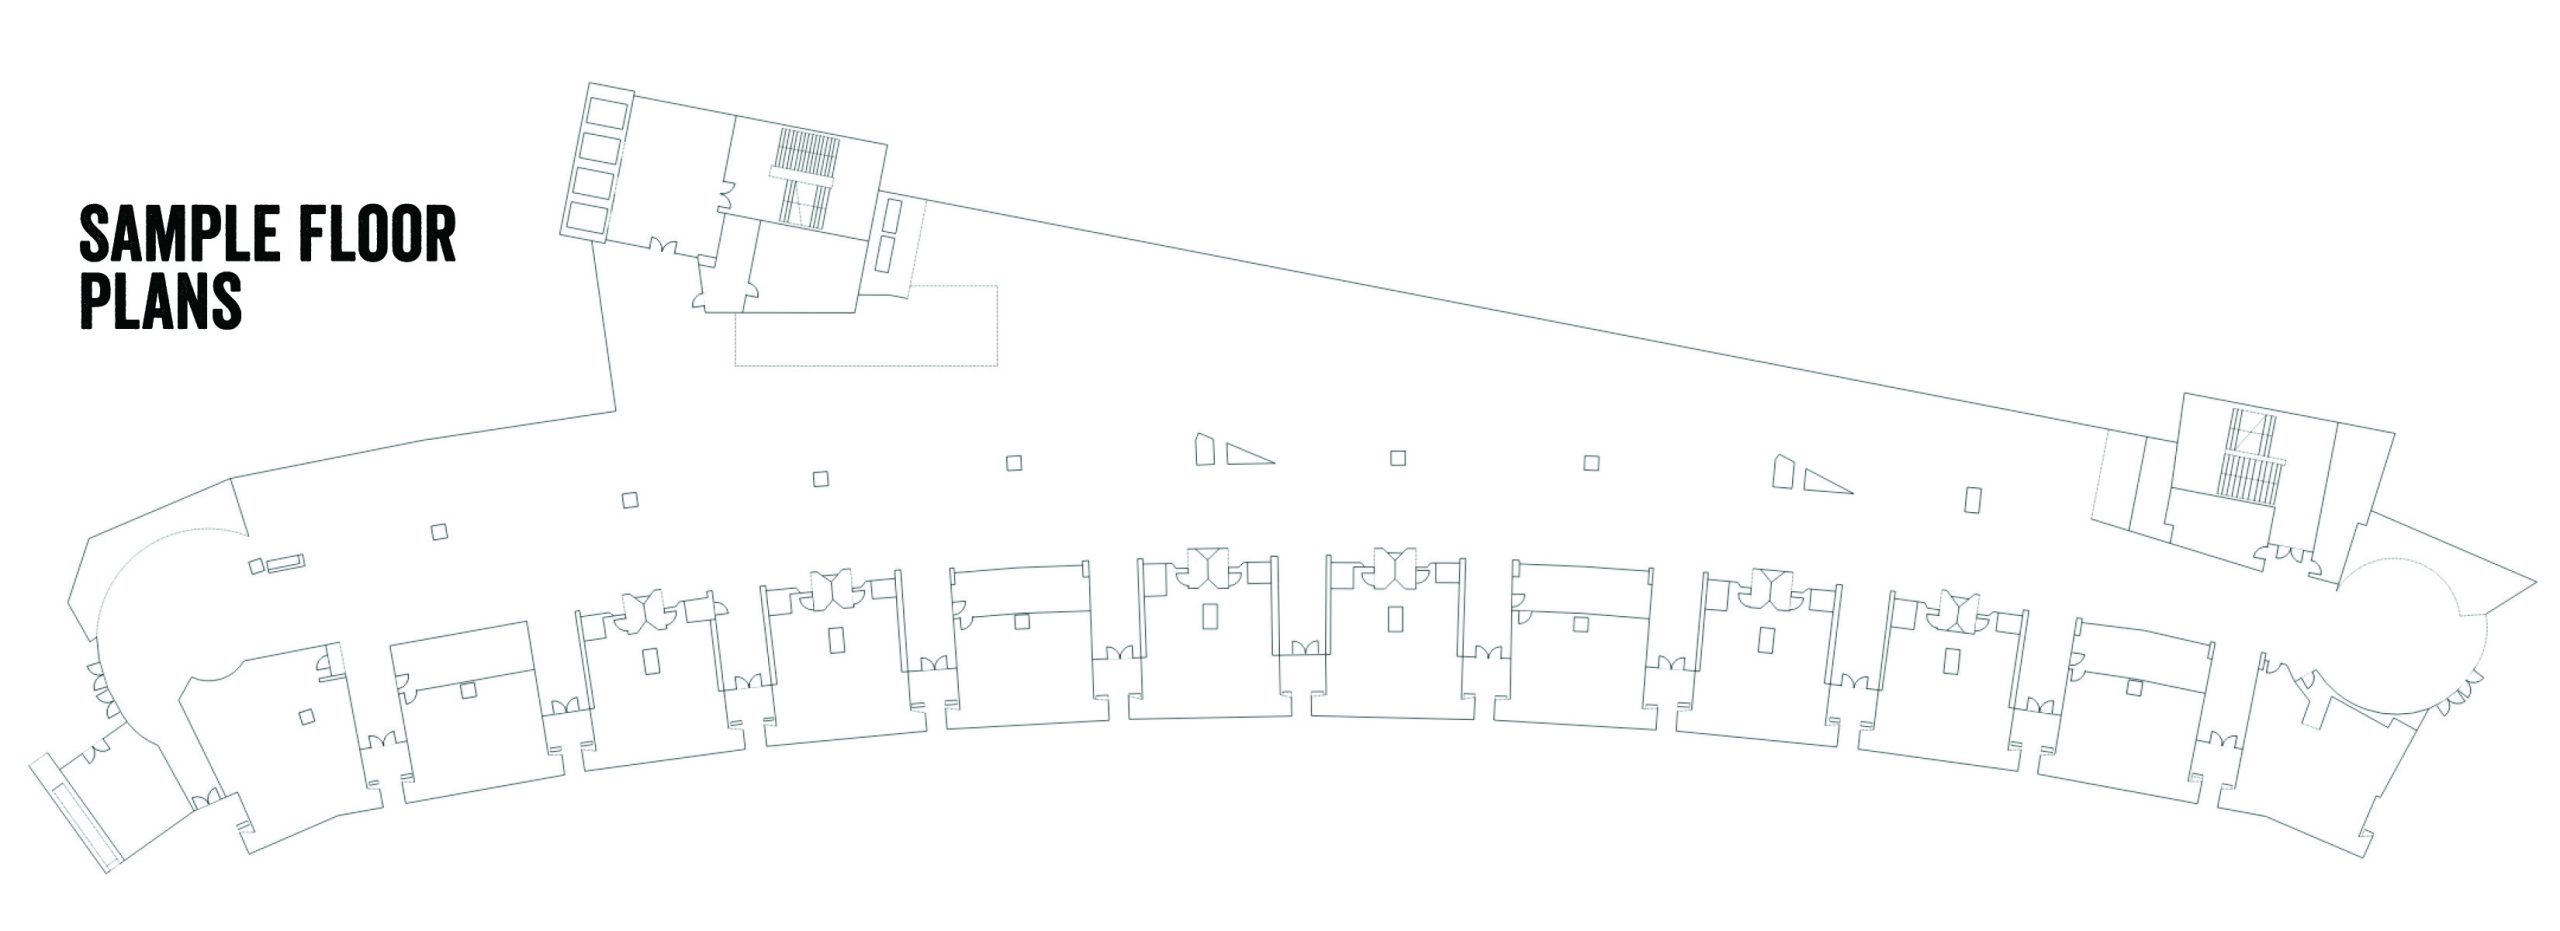 A sample floor plan for an event in the East Club